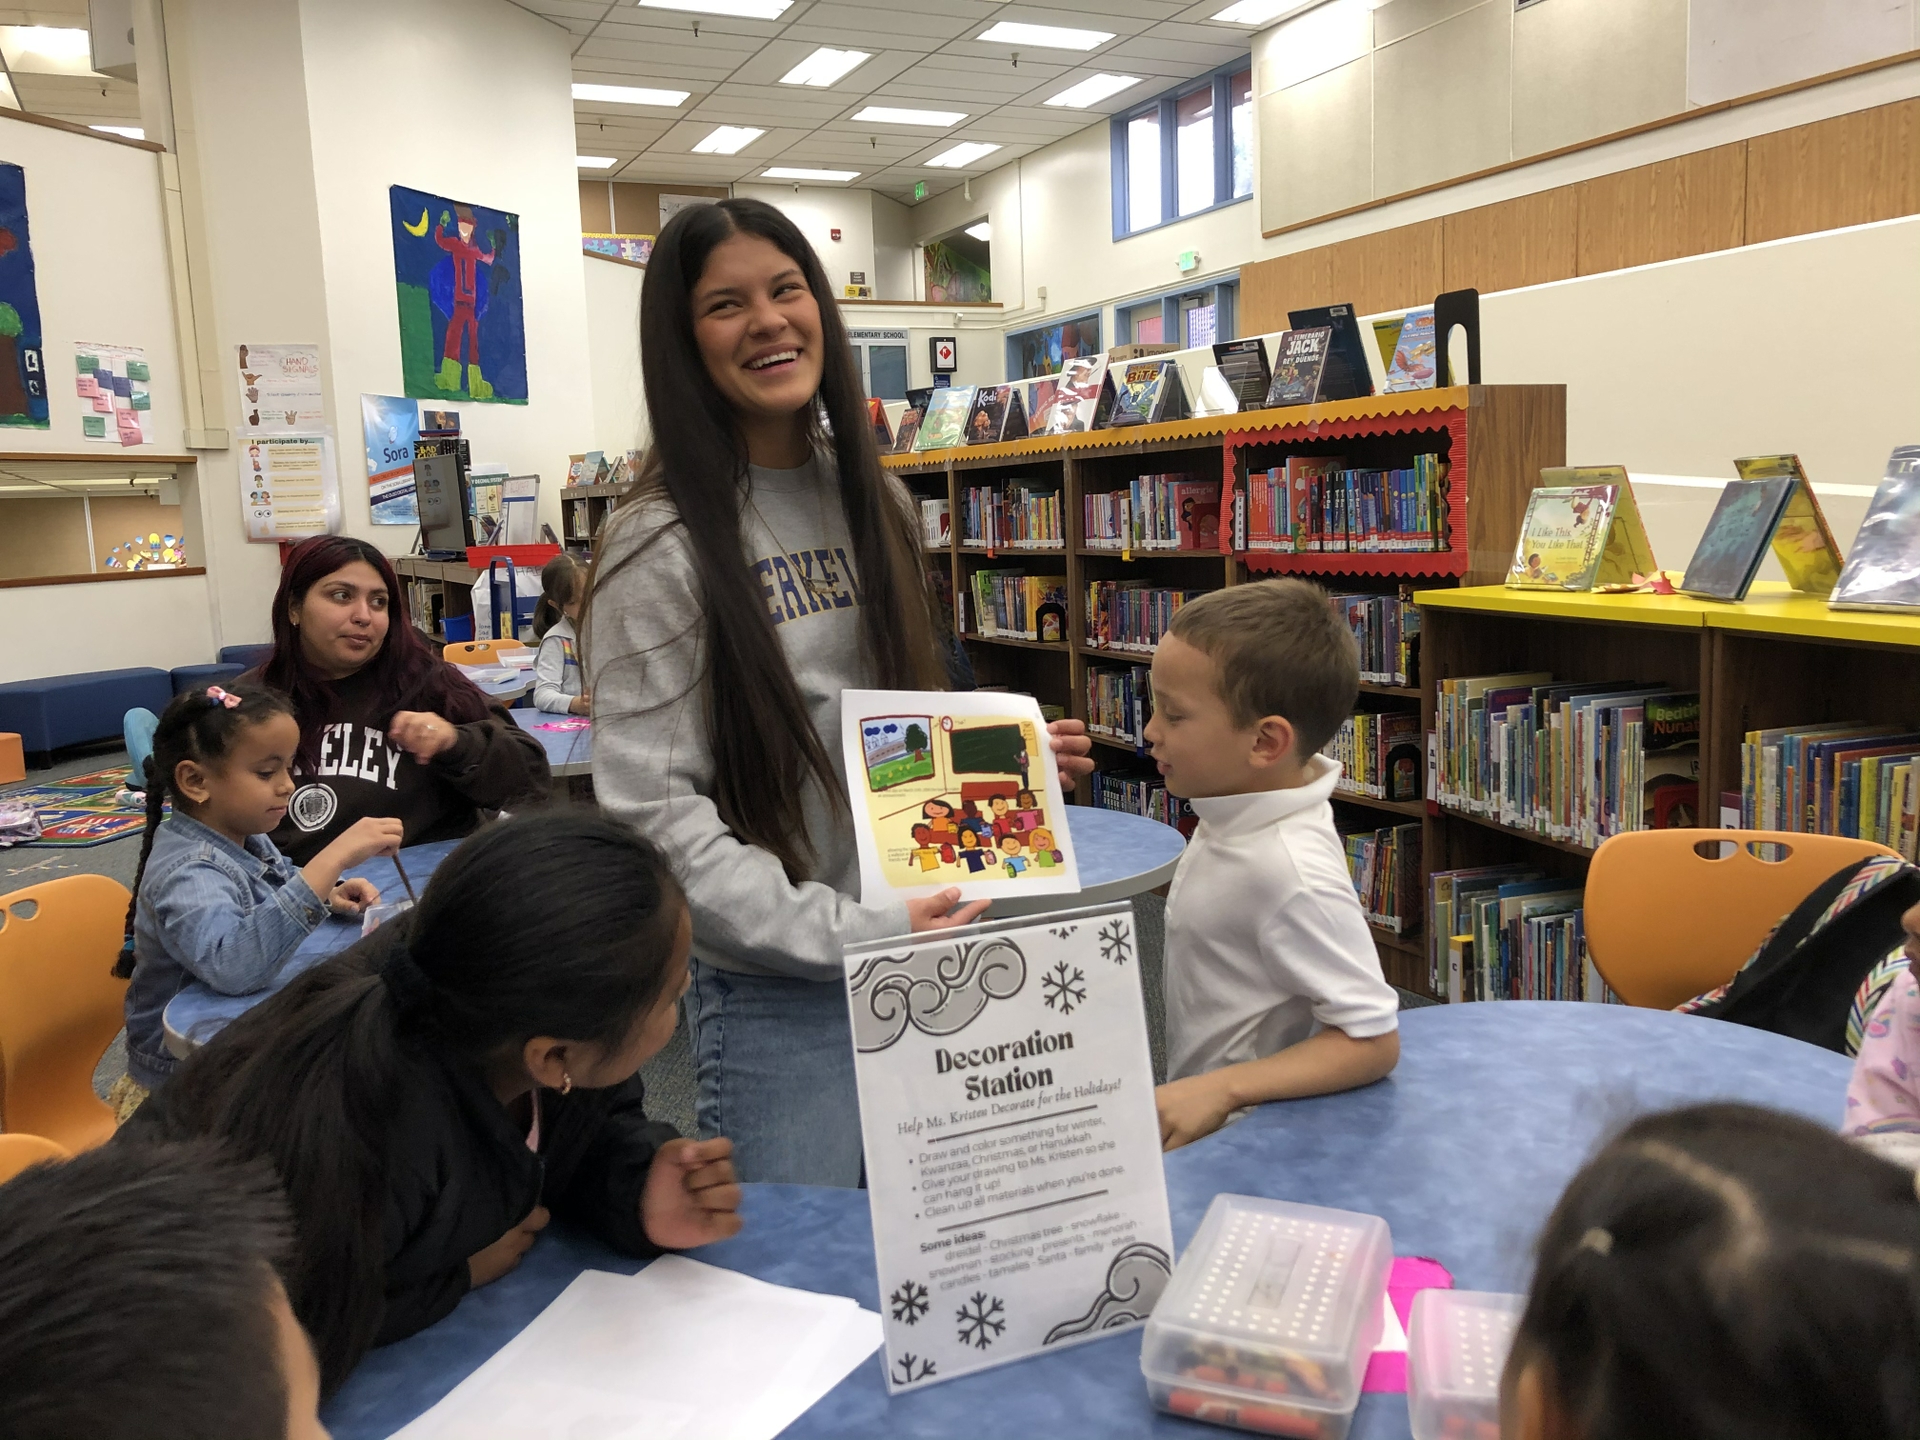 Dayane Silva smiles as a student prods at her children's book in a school library.